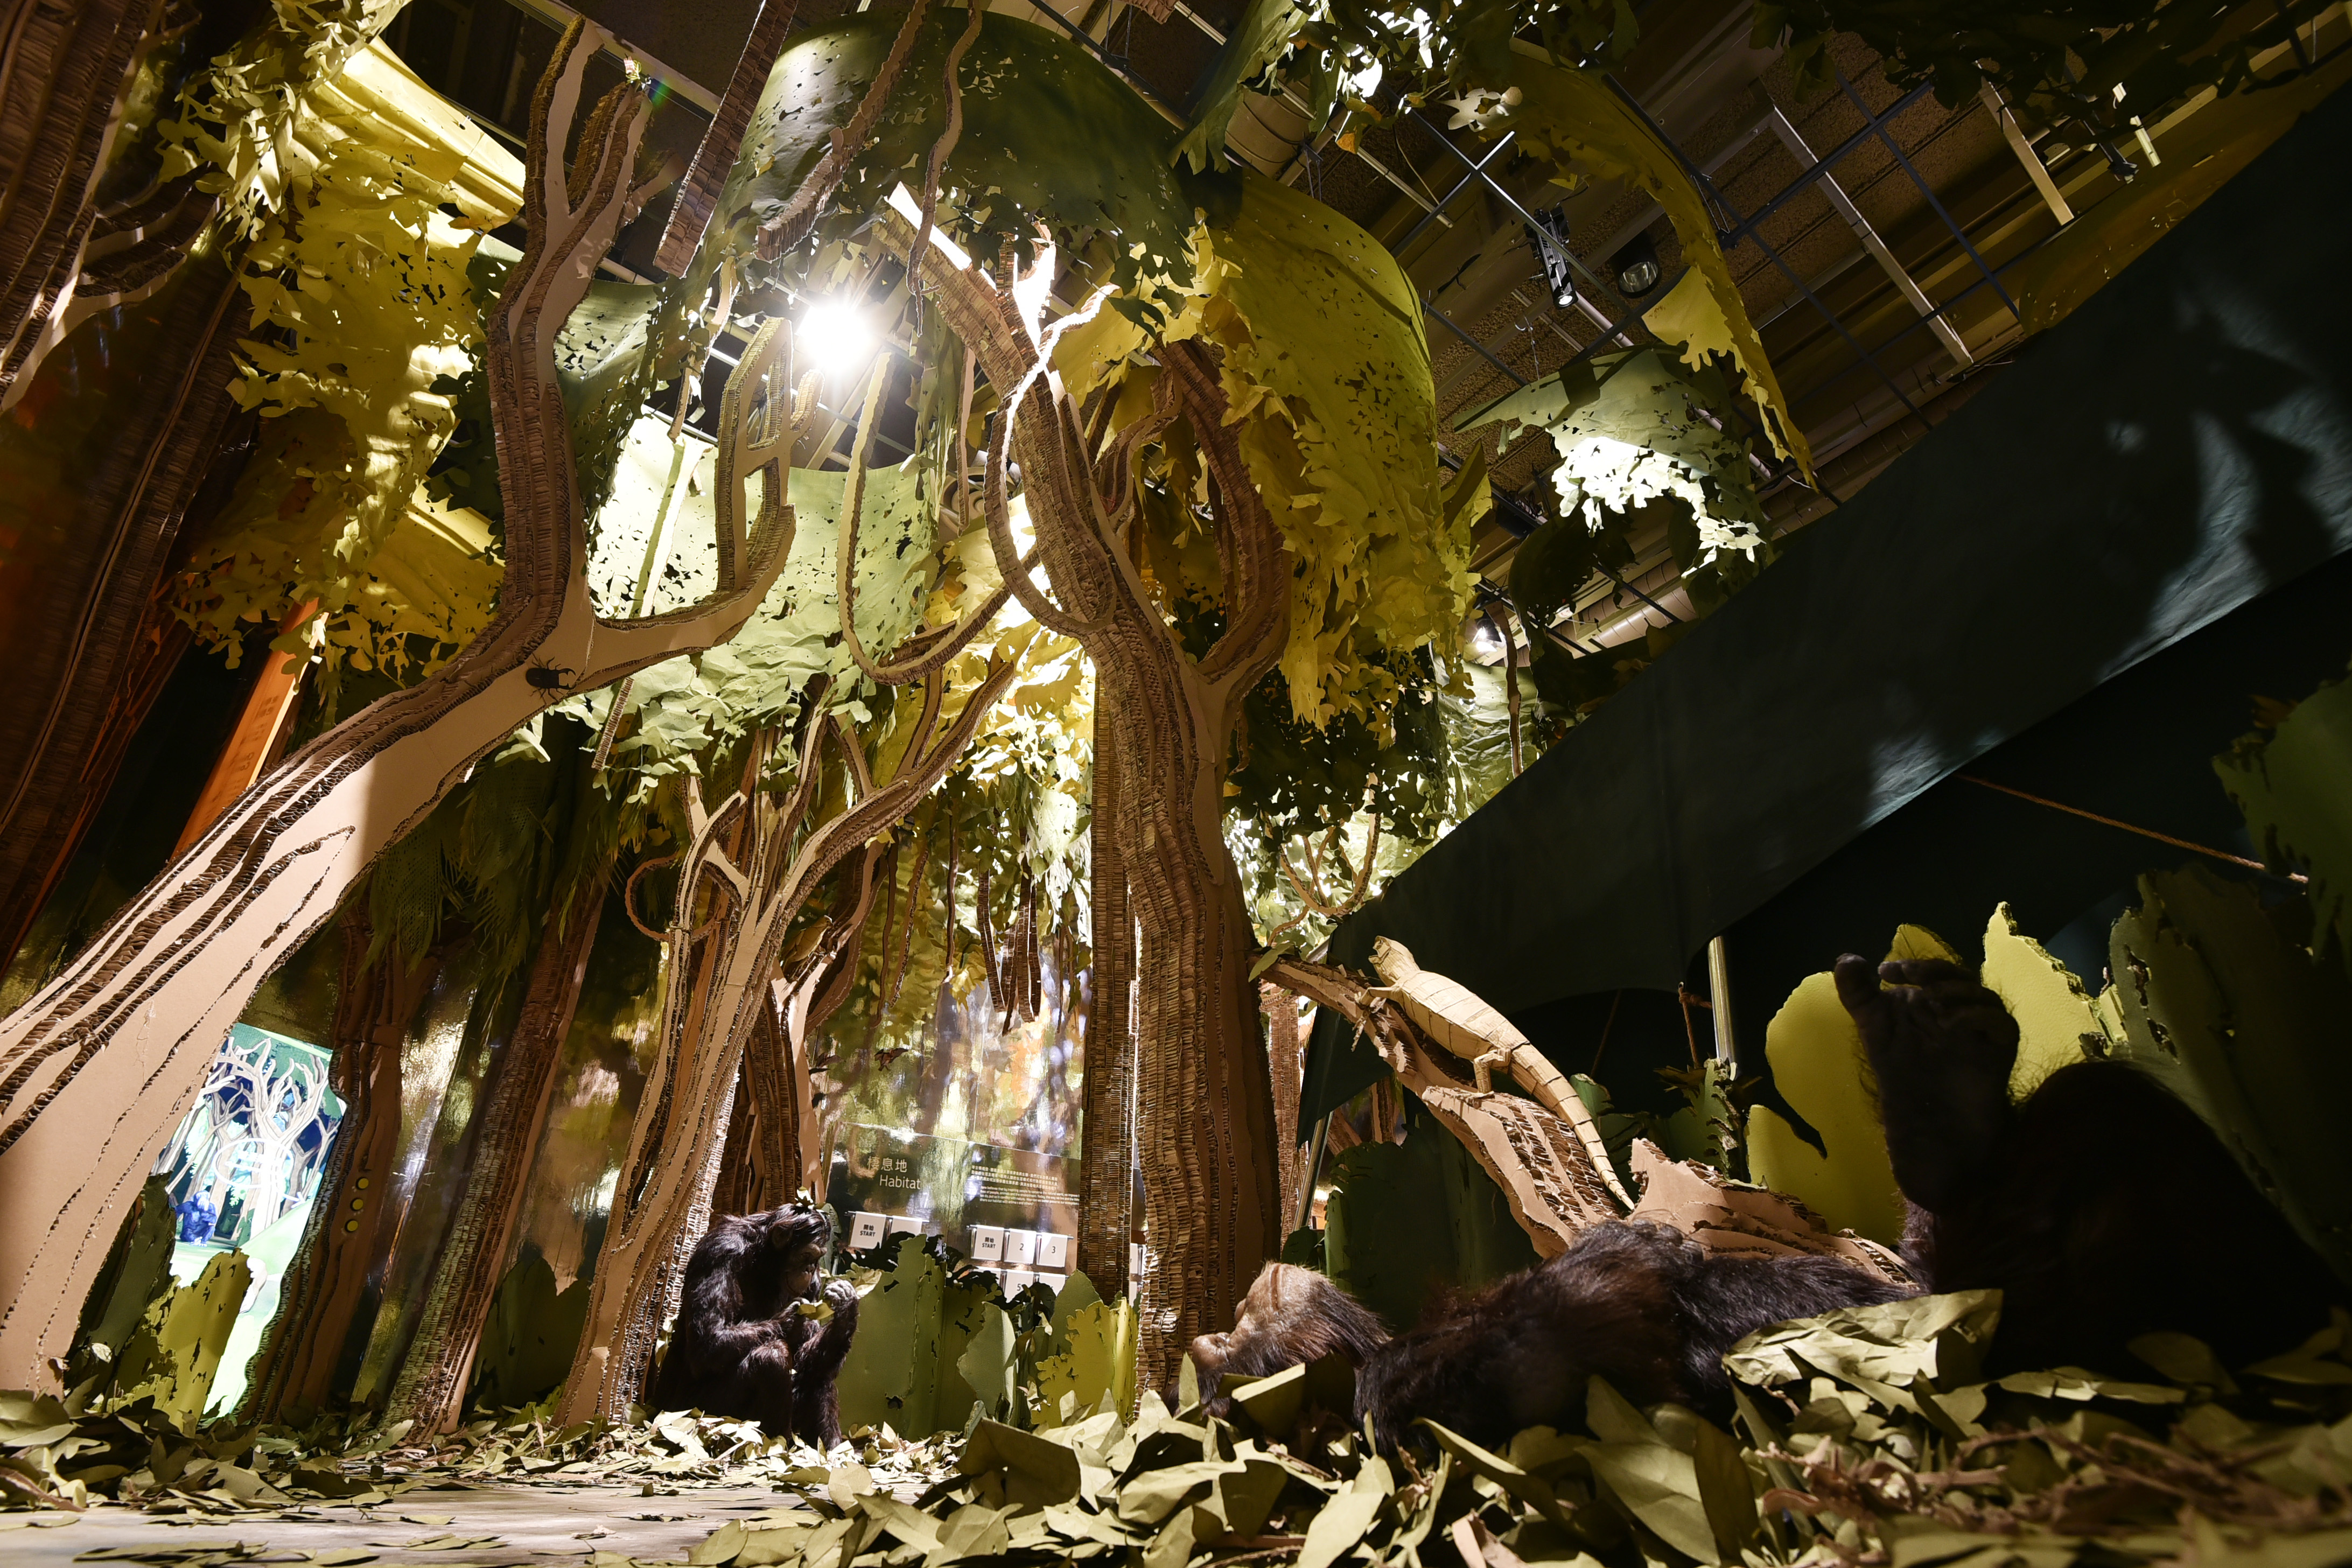 There are lots of animals living in this paper forest. In addition to chimpanzees, can you find some other animals?